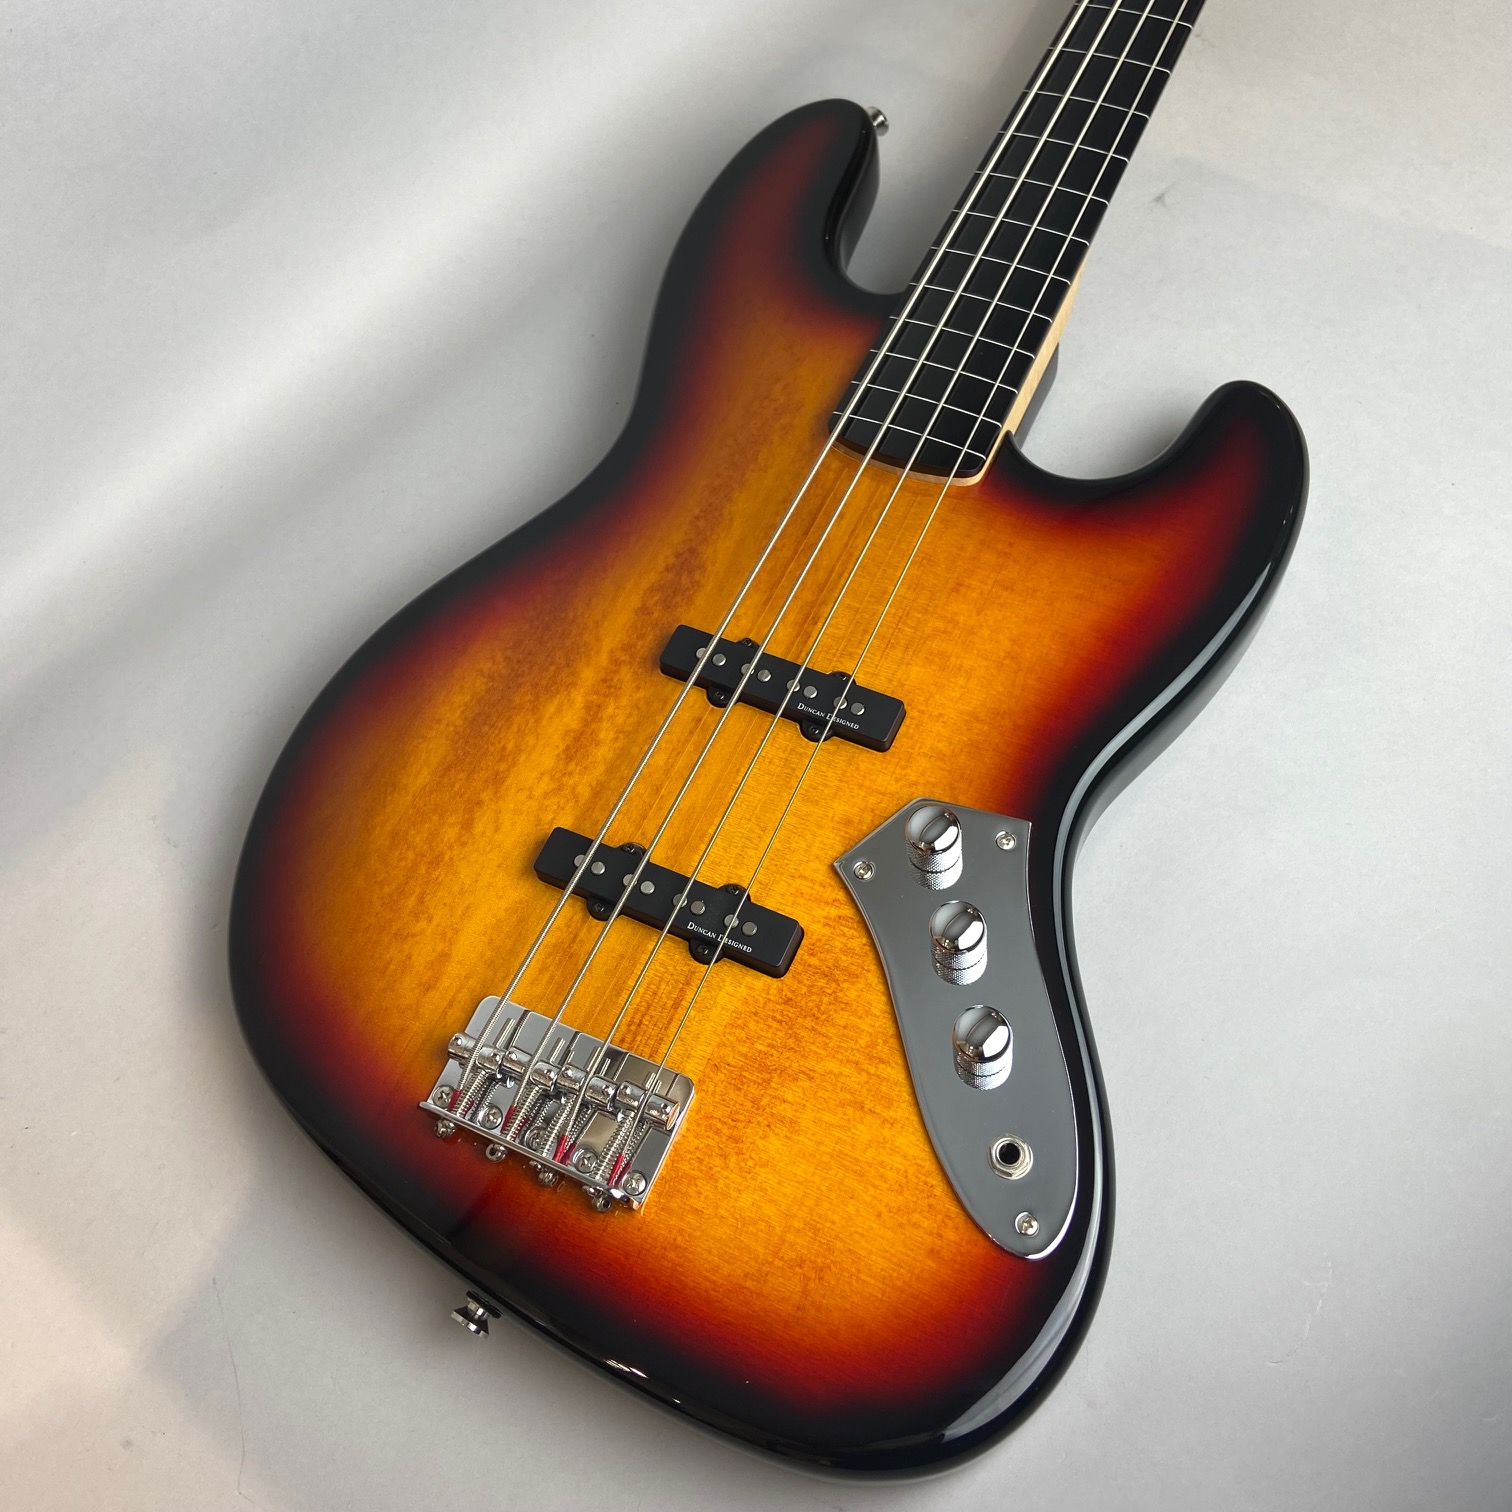 Squier by Fender Vintage Modified Jazz Bass Fretless フレットレス 